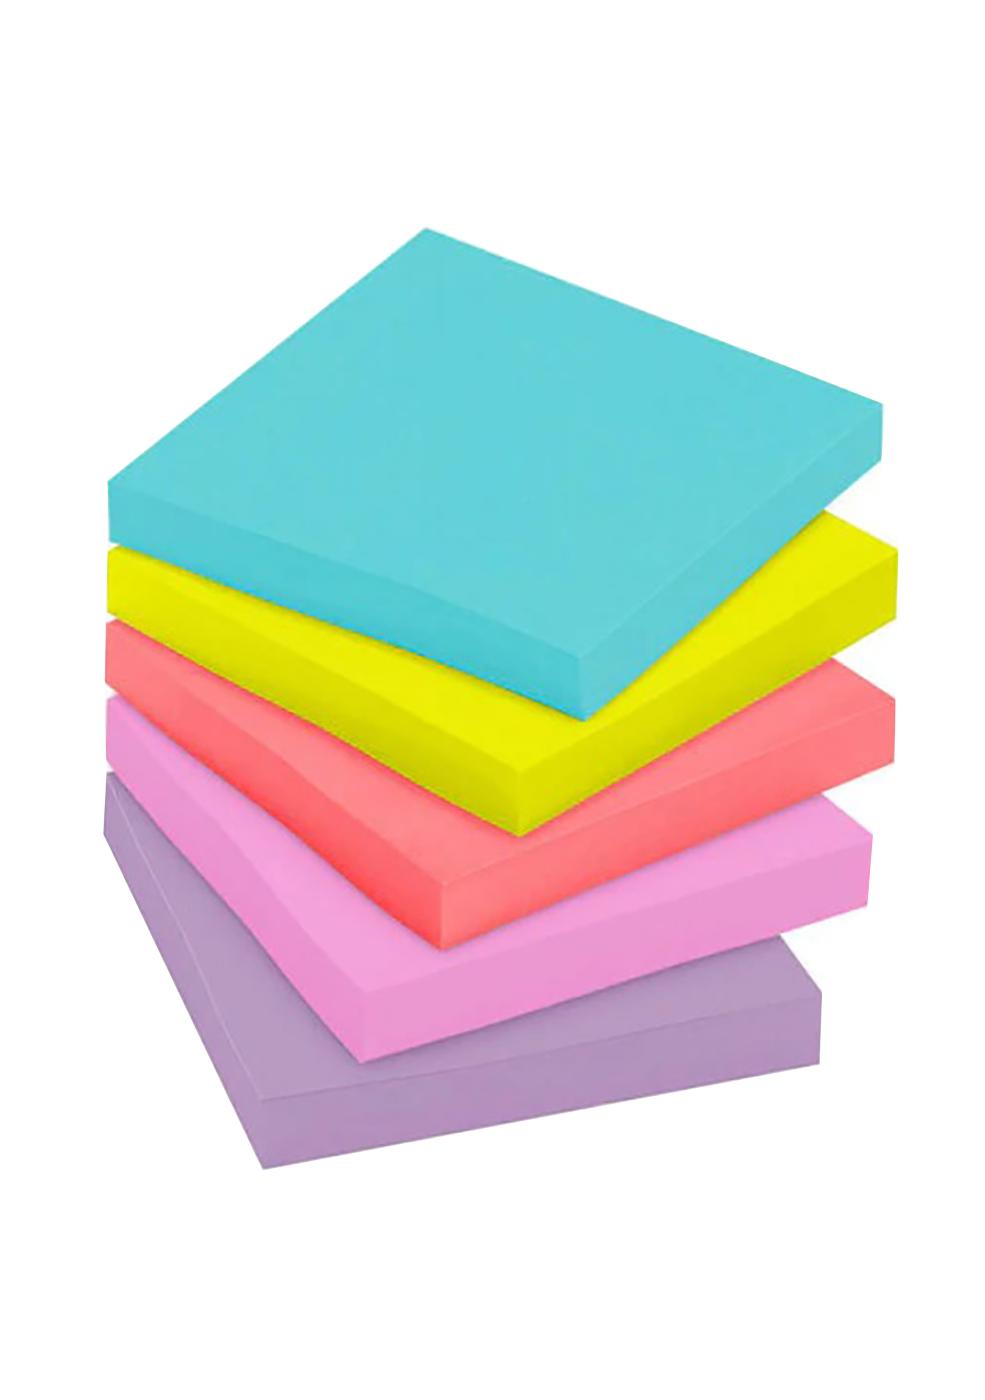 Post-it Super Sticky Notes Cube - Supernova Neon Collection, 450 Ct; image 3 of 3